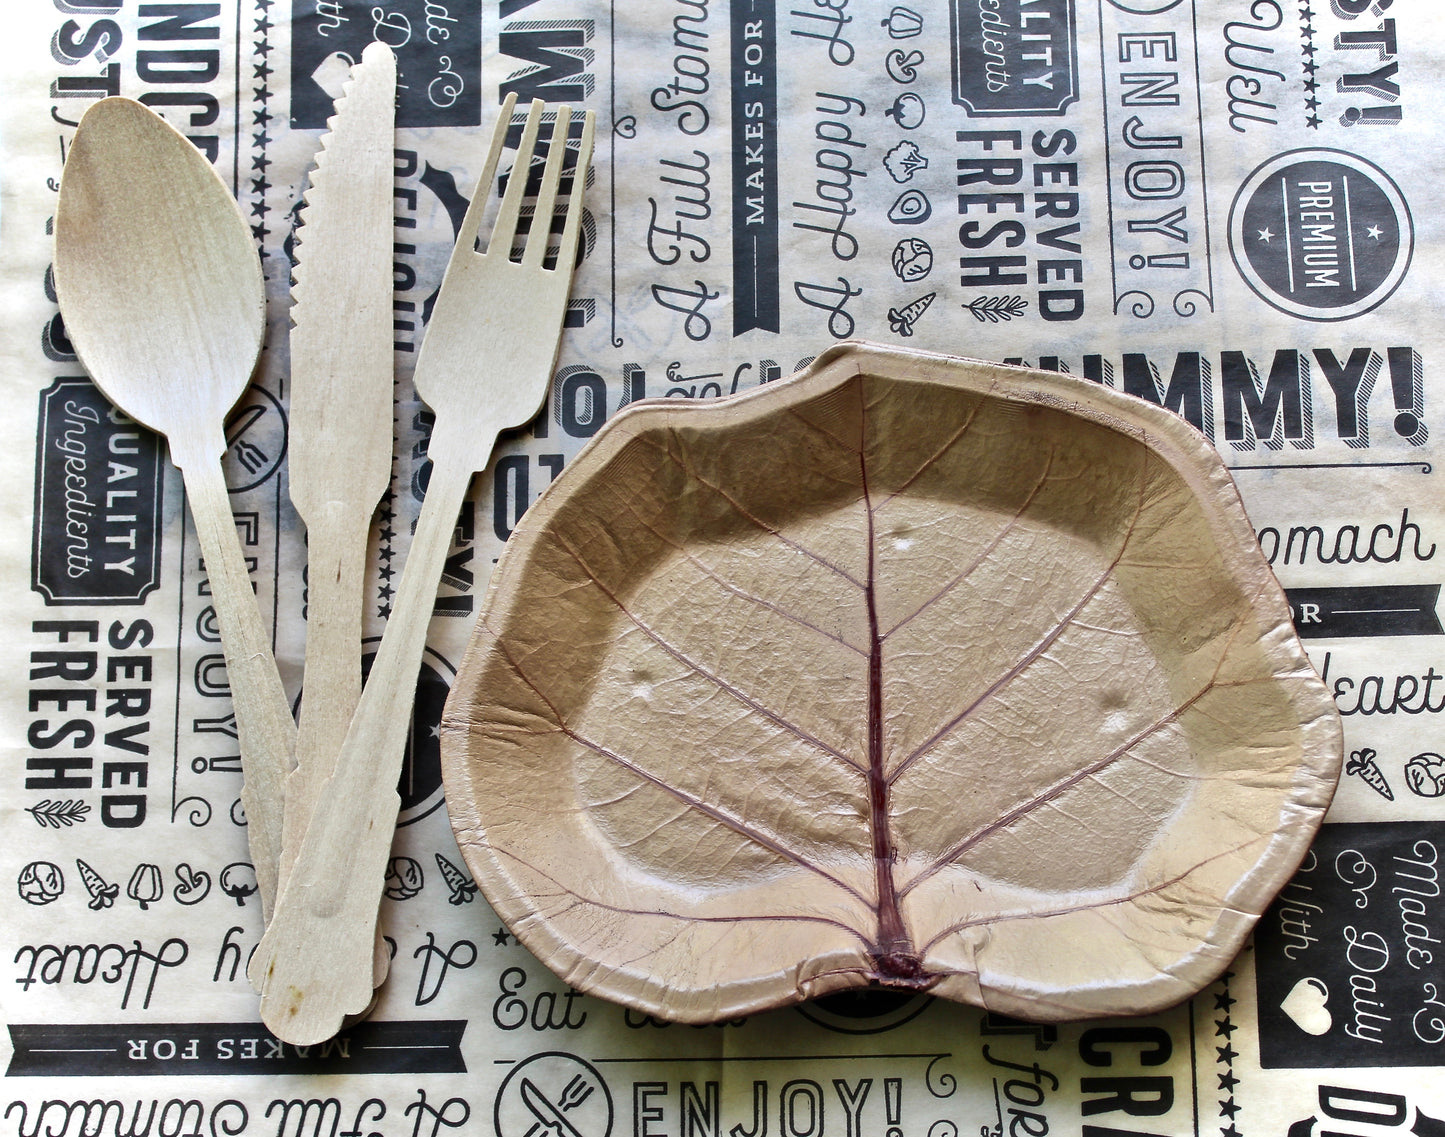 Copy of bamboo Type palm  Leaf Plate 50 Pic Square 10" - 50 Pic Sea Grape Dessert Plate 7" - 150  Pic Utensils Wood Birch and 40 pic Napkin